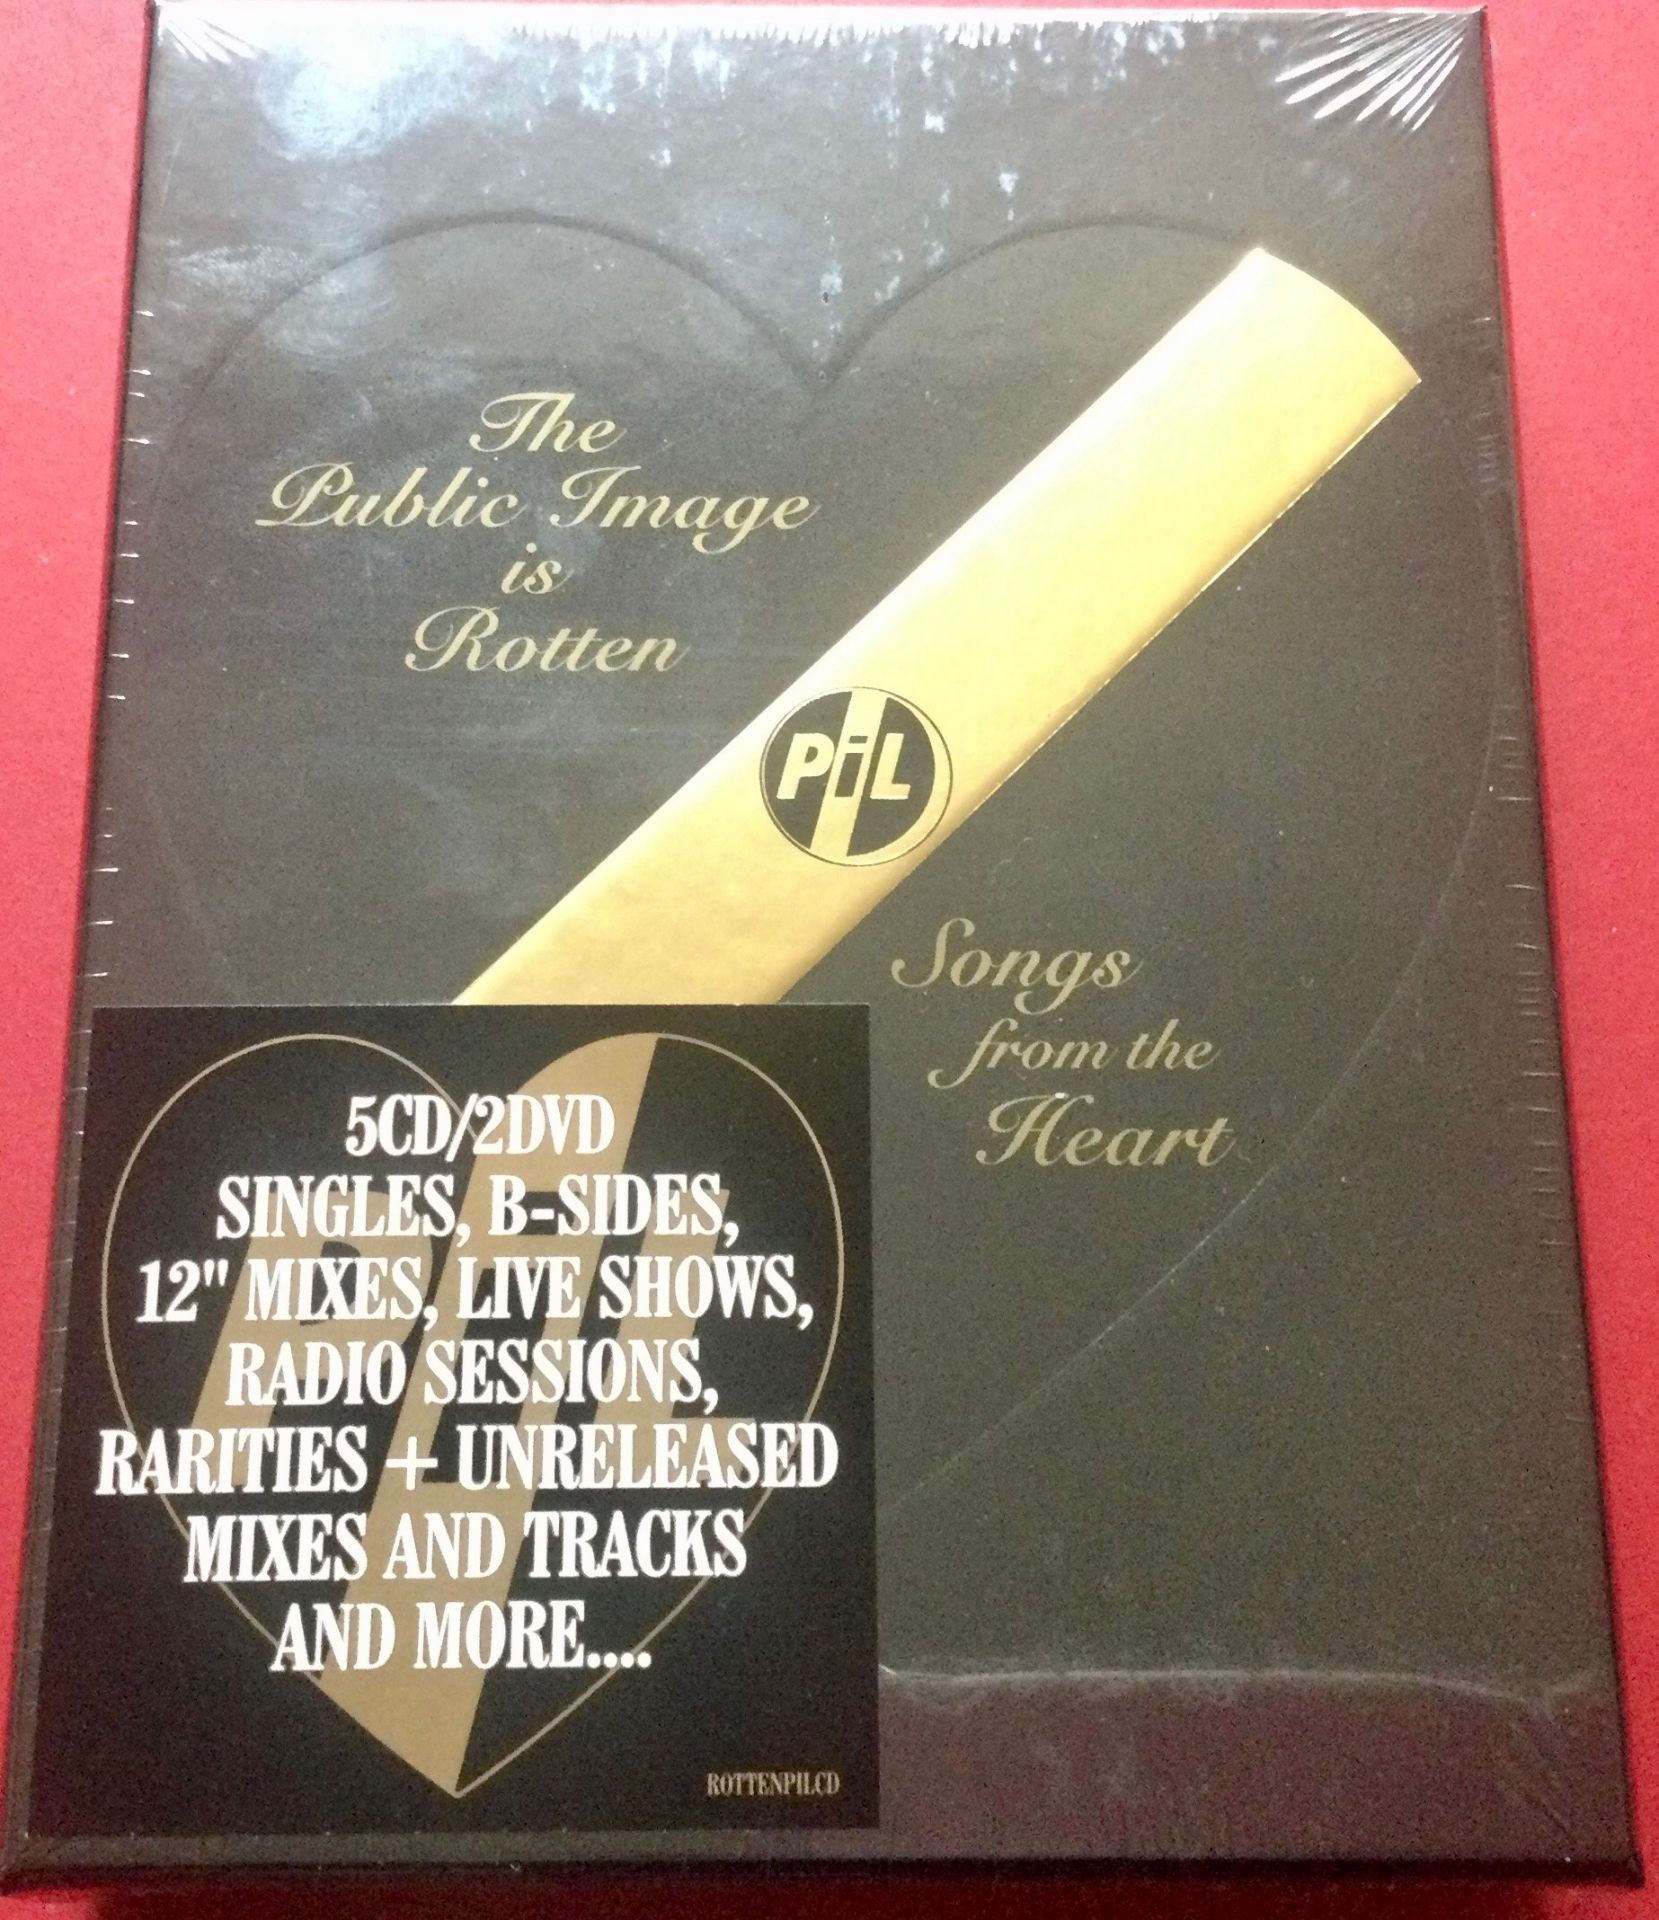 P.I.L ‘THE PUBLIC IMAGE IS ROTTEN’ BOX SET. This ‘Songs From The Heart’ box set contains all the